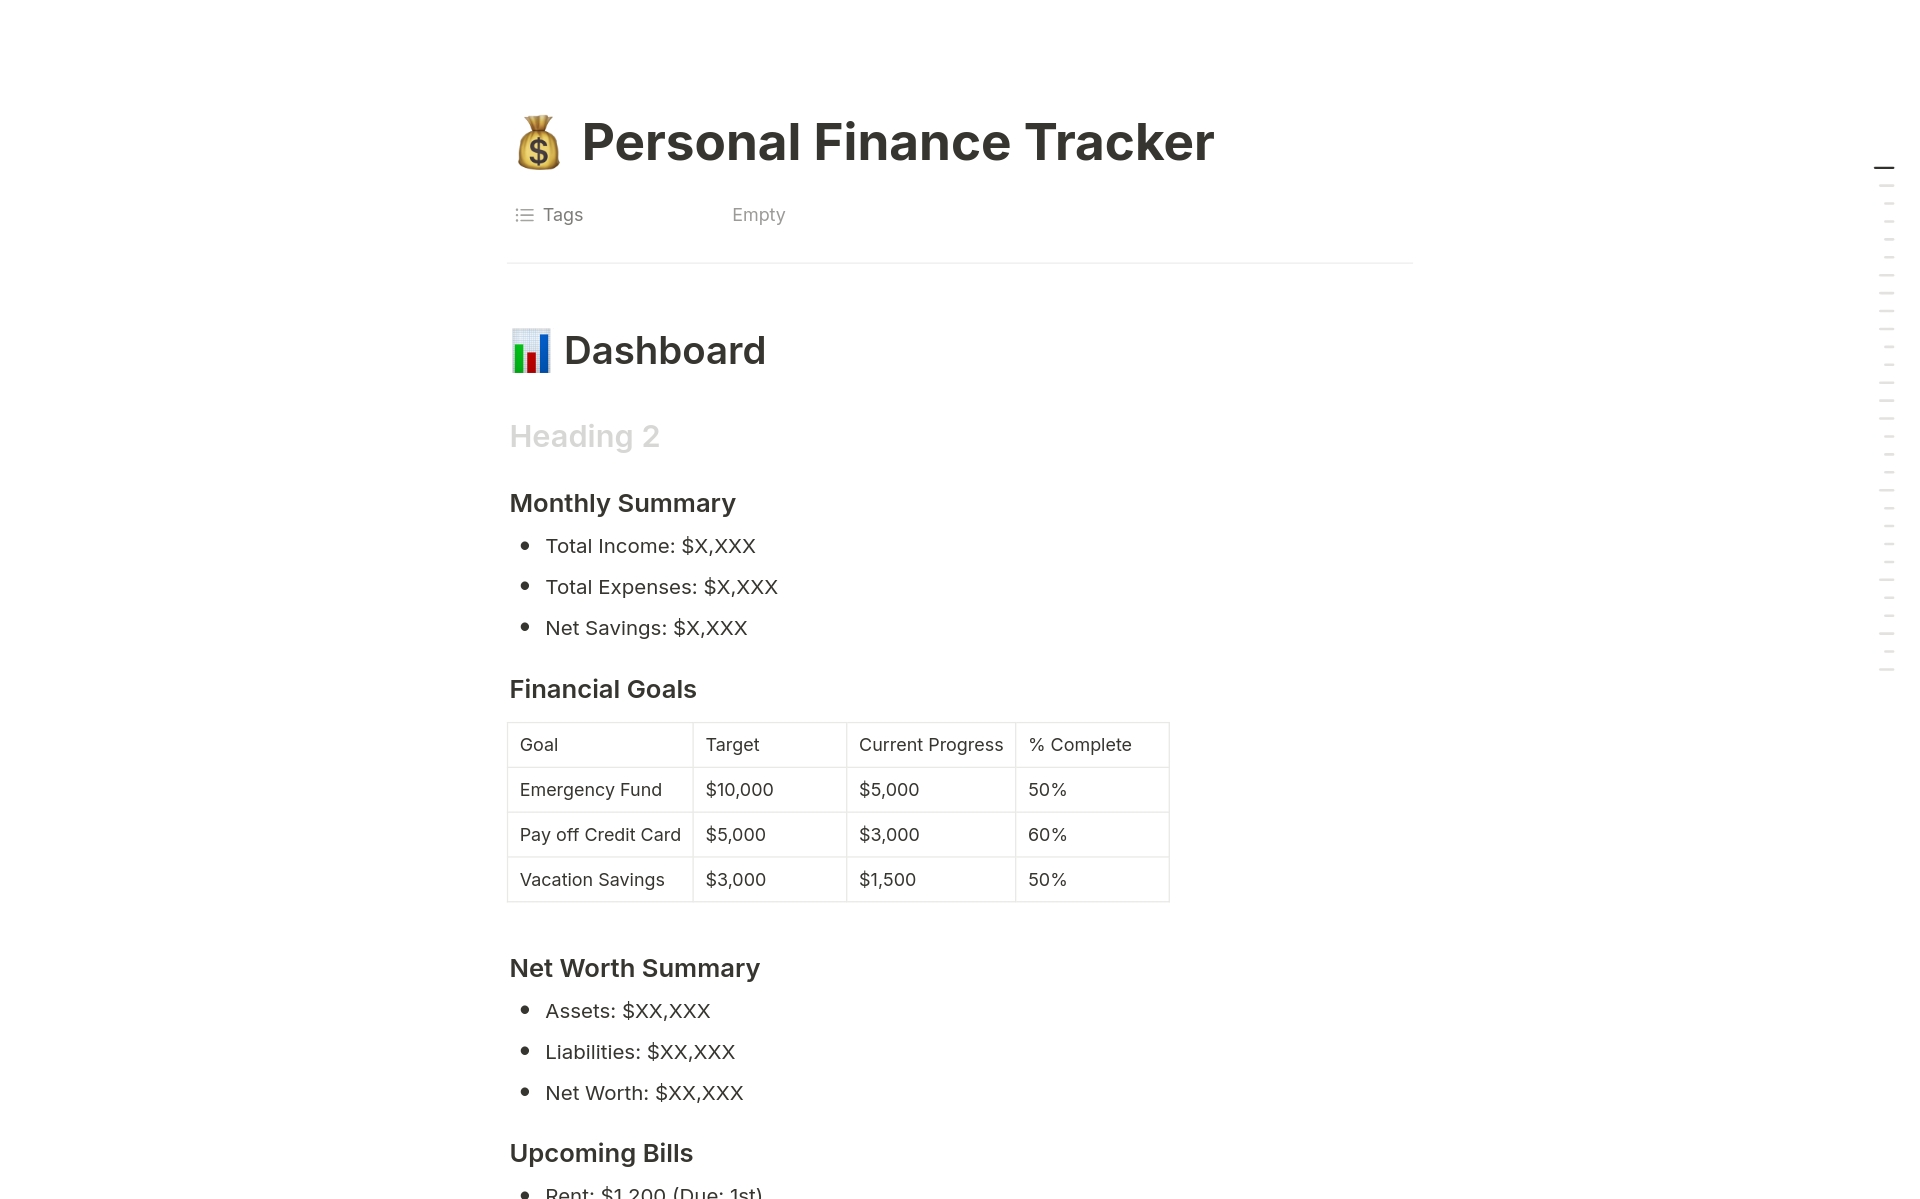 💰 Comprehensive Personal Finance Tracker Template
Take control of your financial future with this all-in-one Notion template. Designed for both finance novices and money-savvy individuals, this tracker helps you manage your income, expenses, savings, and investments with ease.